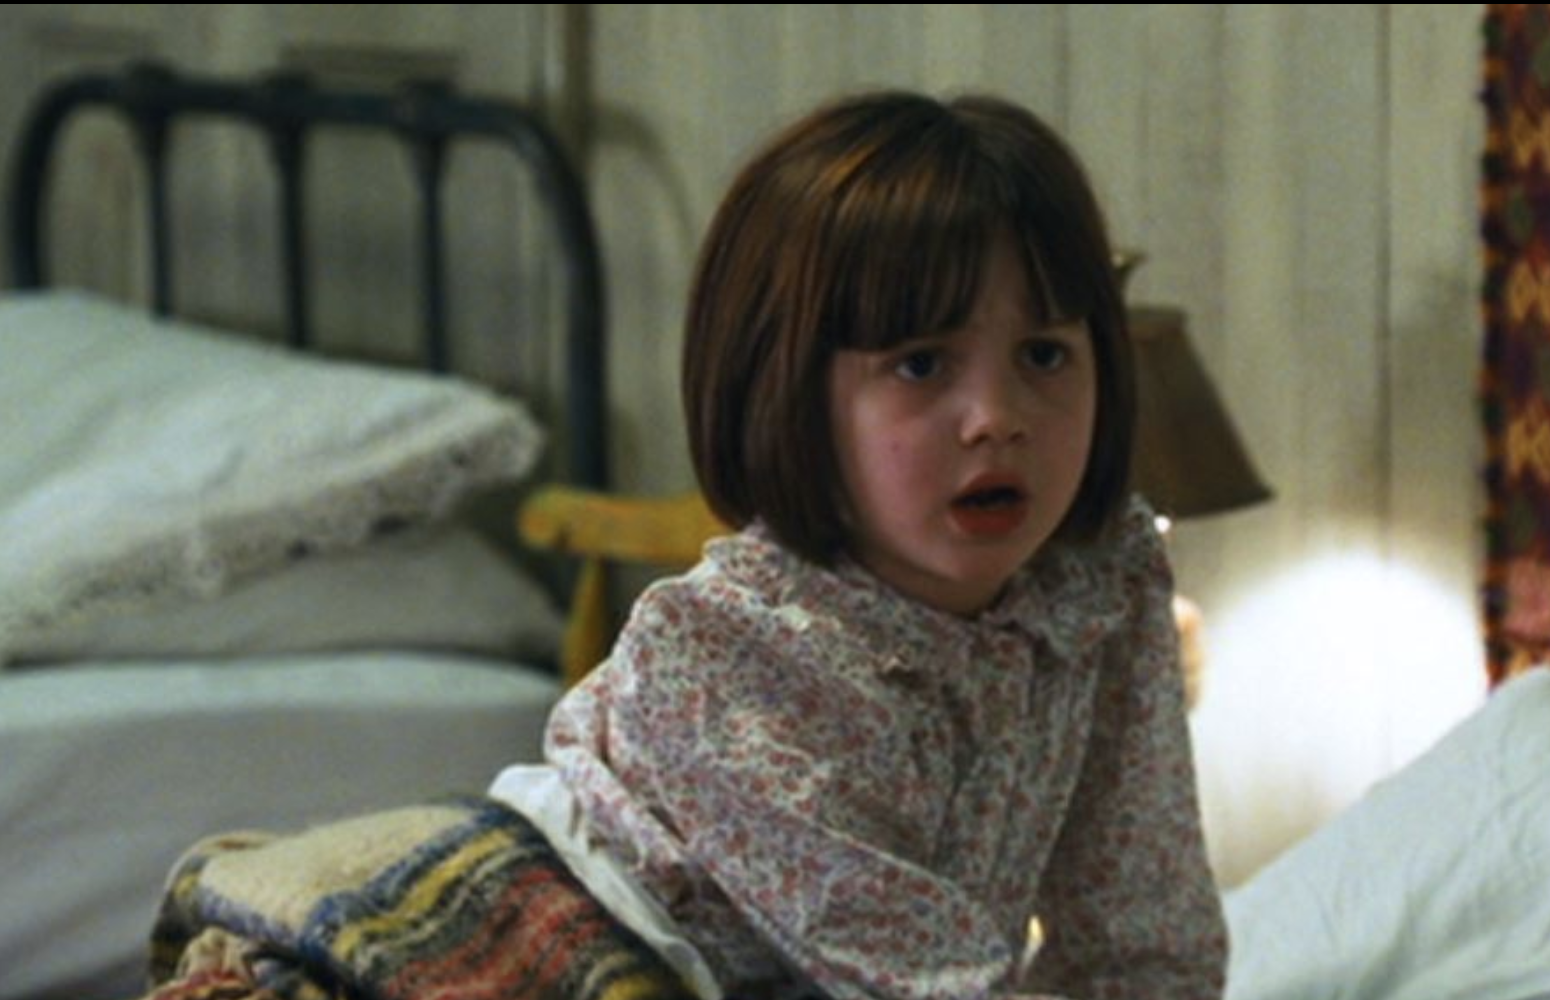 Nanny McPhee - Christianna Brown sat up in bed with a shocked expression